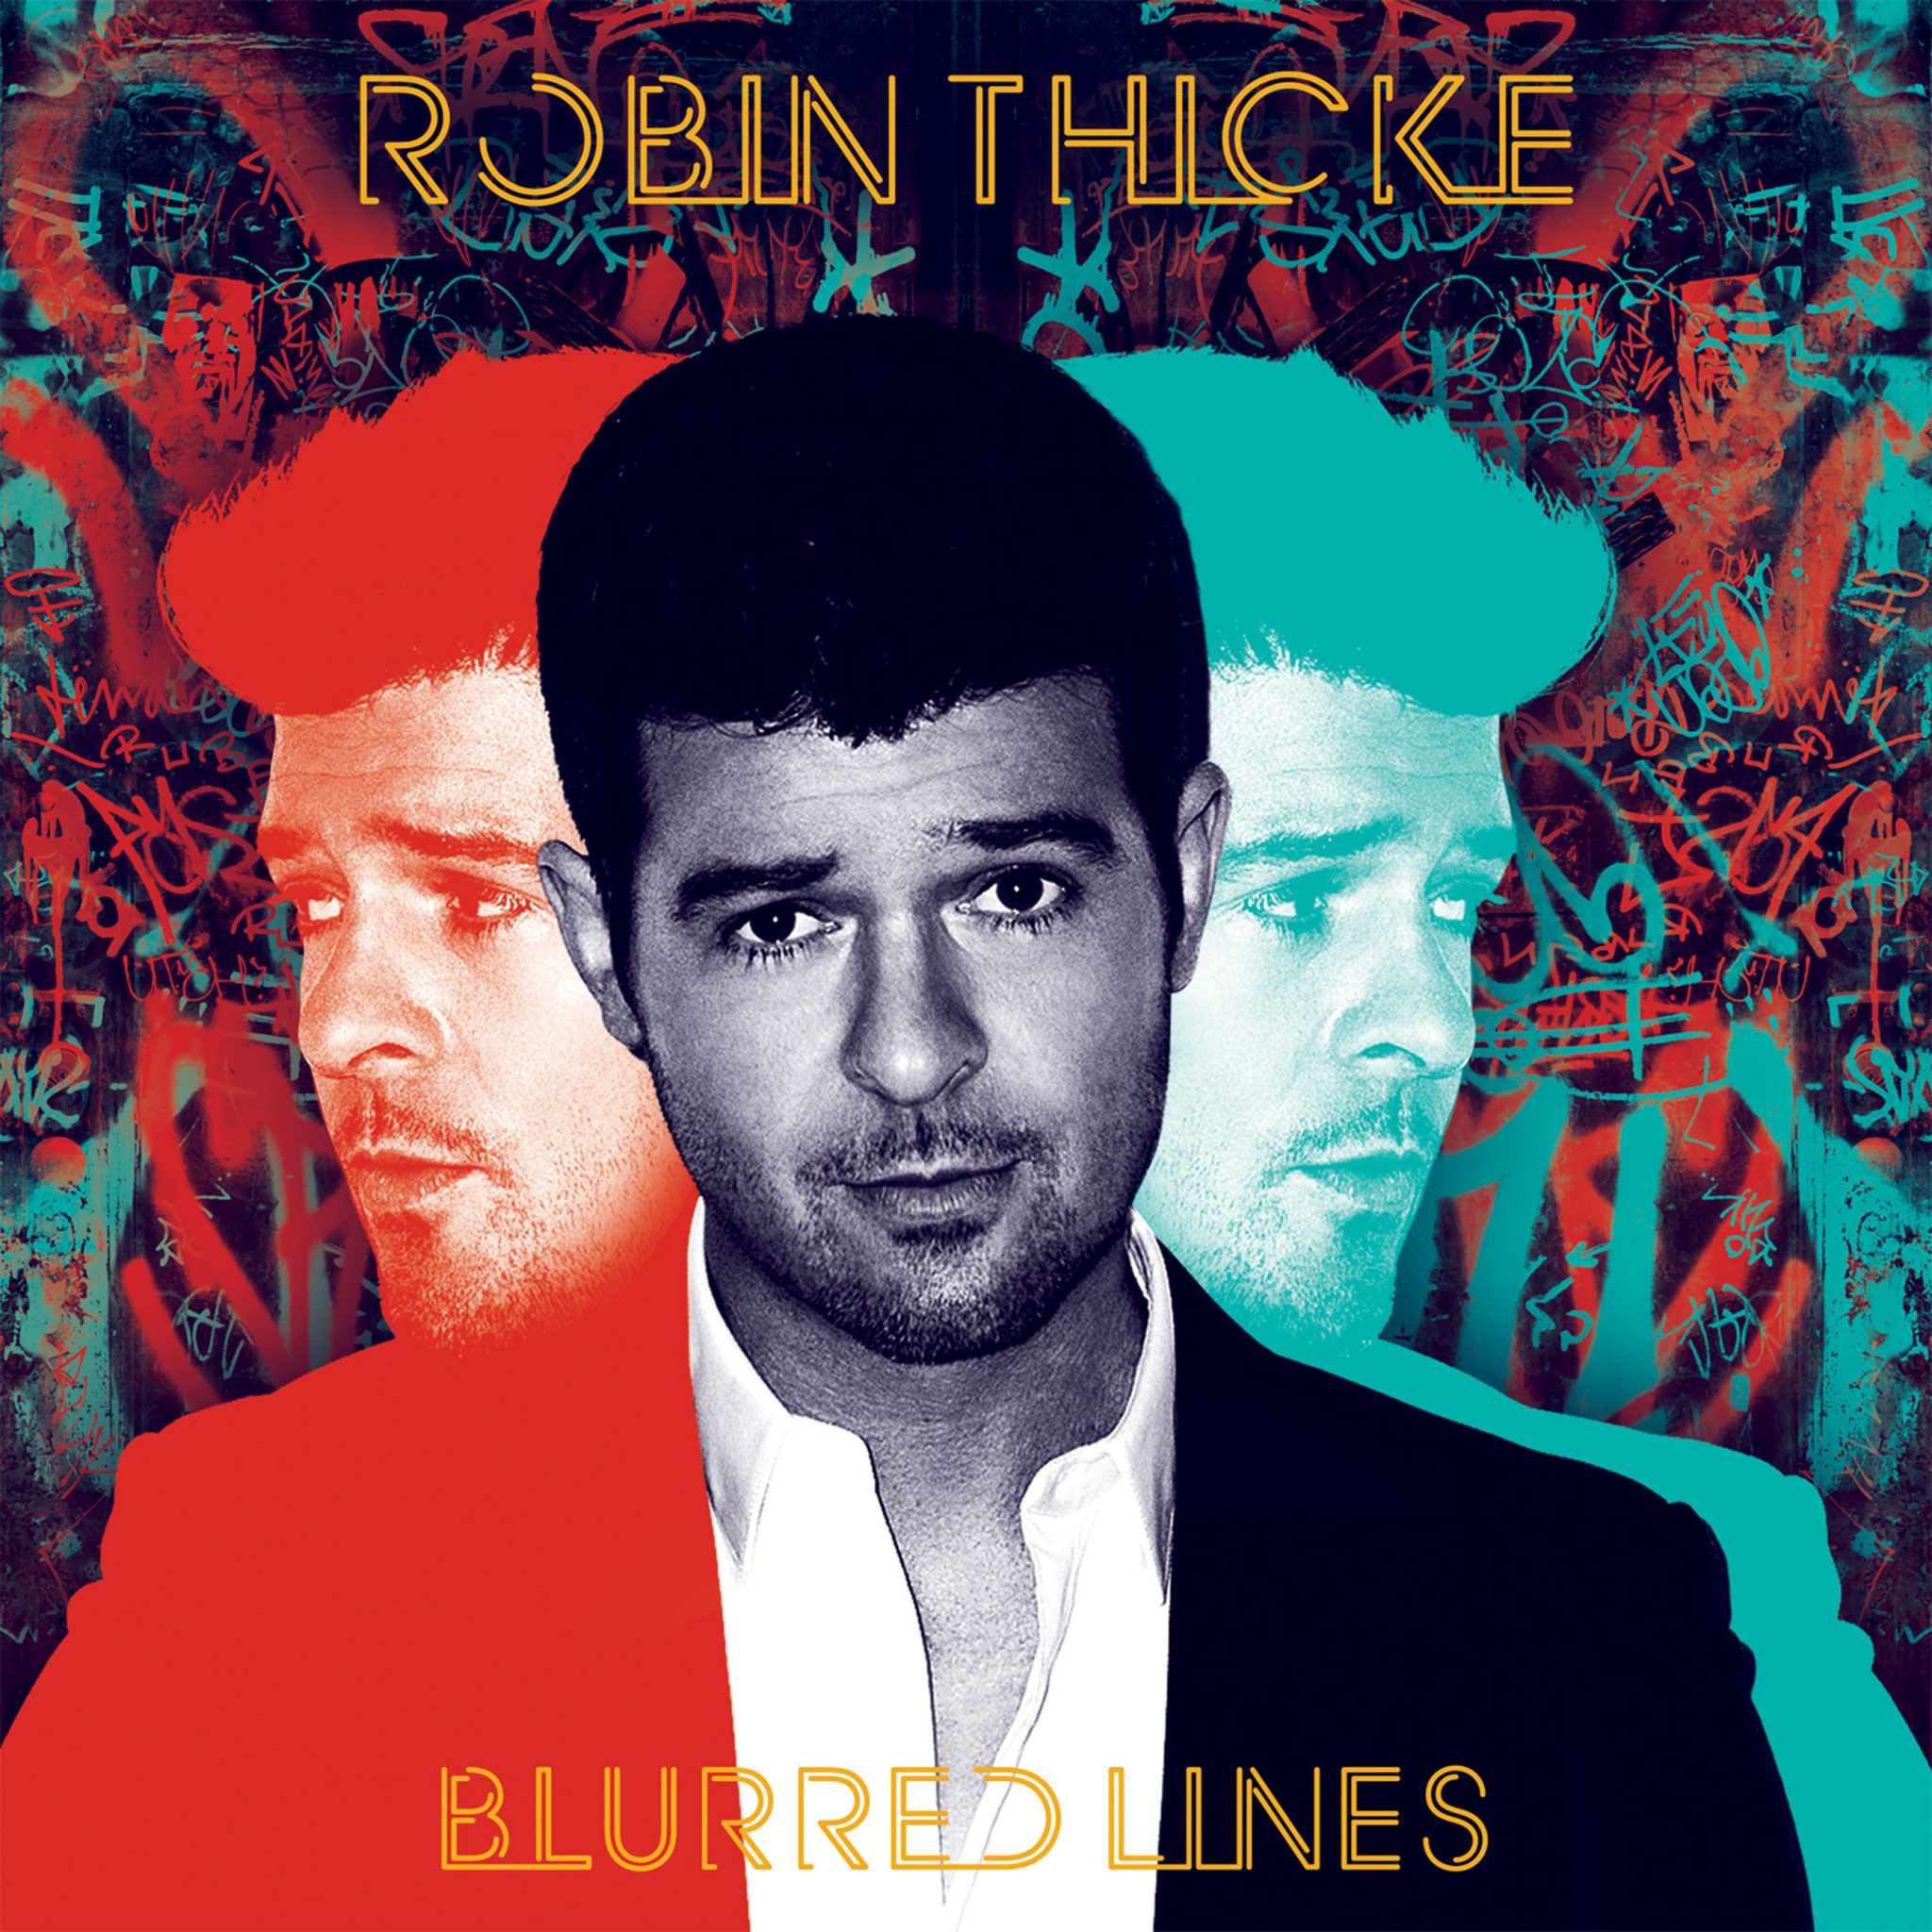 News Added Jul 02, 2013 is an American R&B singer-songwriter, musician, composer, and actor. Thicke is a dual citizen, also holding Canadian citizenship through his father, actor, musician and TV host Alan Thicke. Thicke's albums, which he previously released under the name Thicke, are noted for their feature of a predominantly R&B sound.[2][3] Thicke has […]